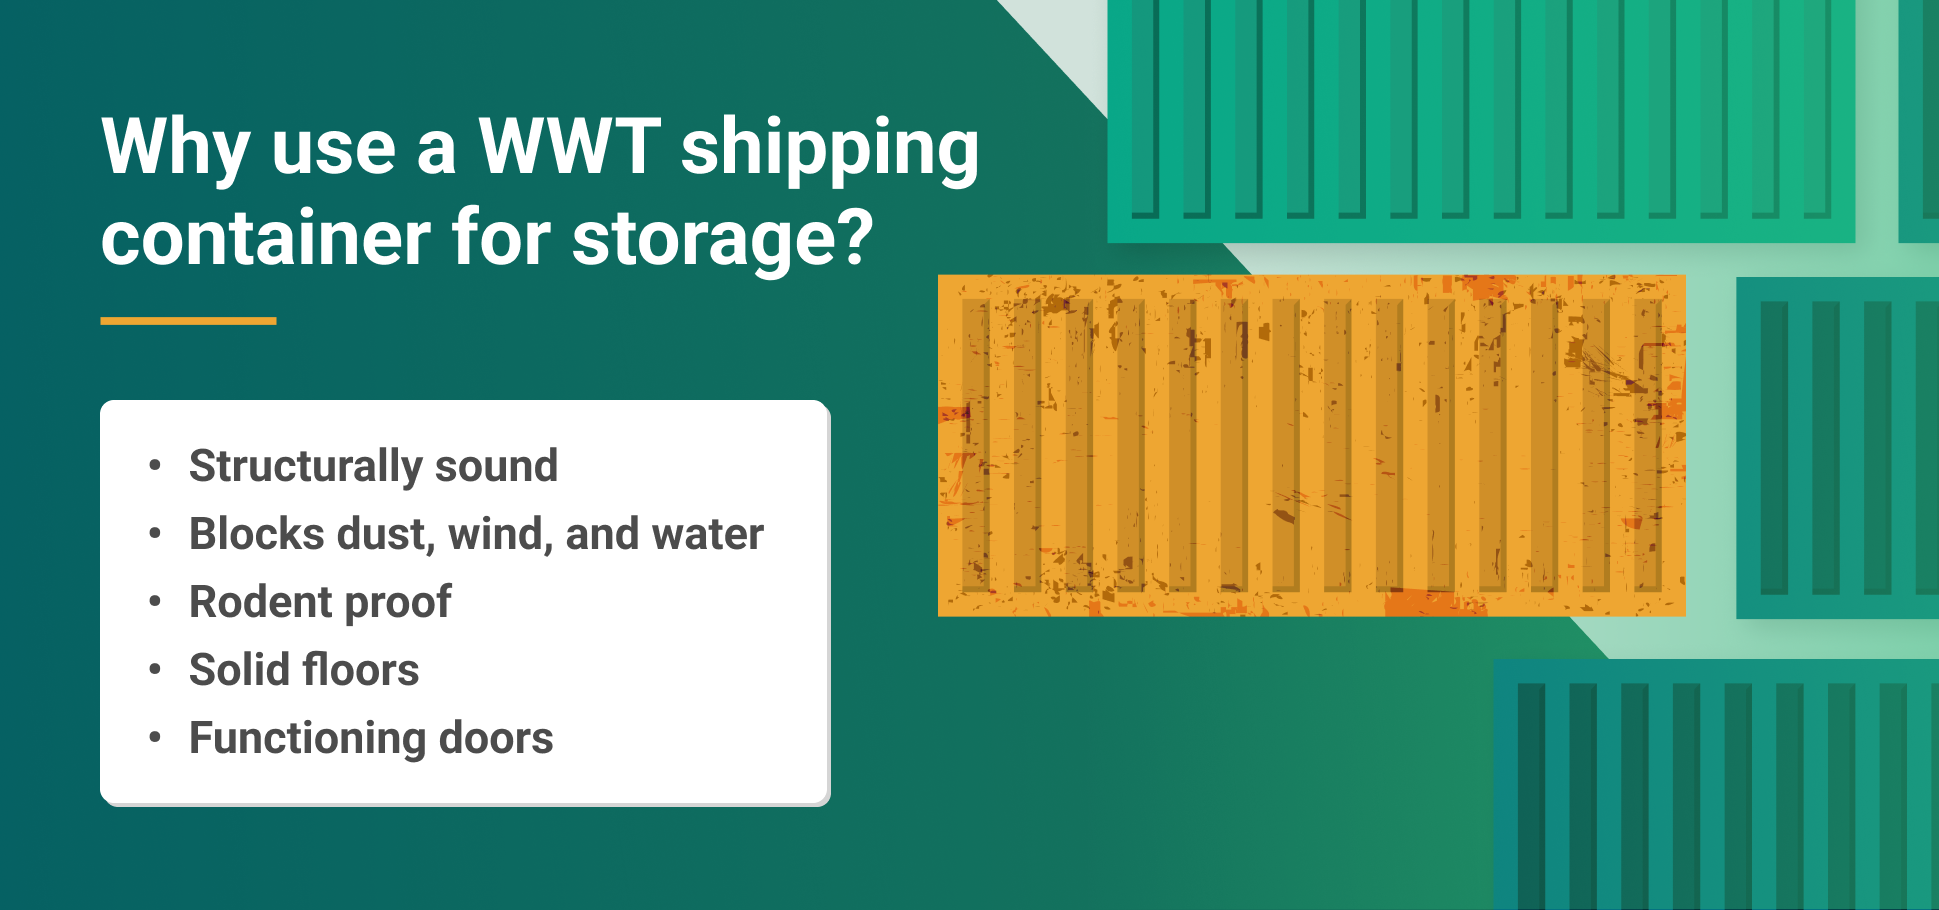 Benefits of using WWT containers for storage